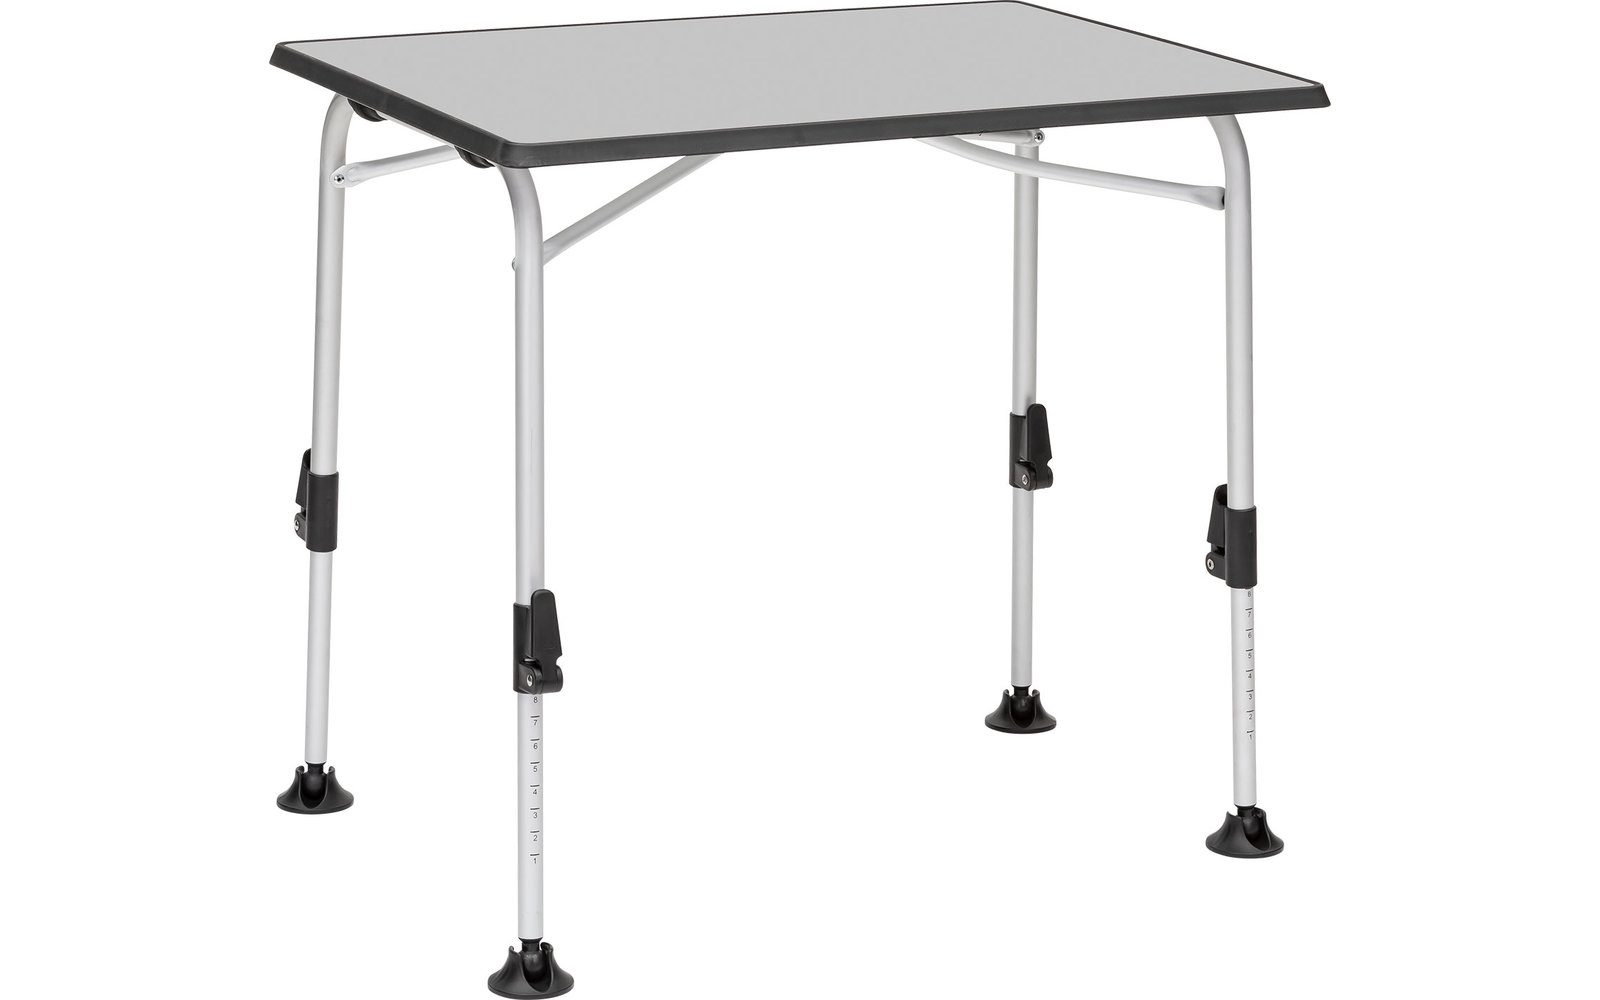 Berger Ivalo 1 Table de camping 80 x 60 cm